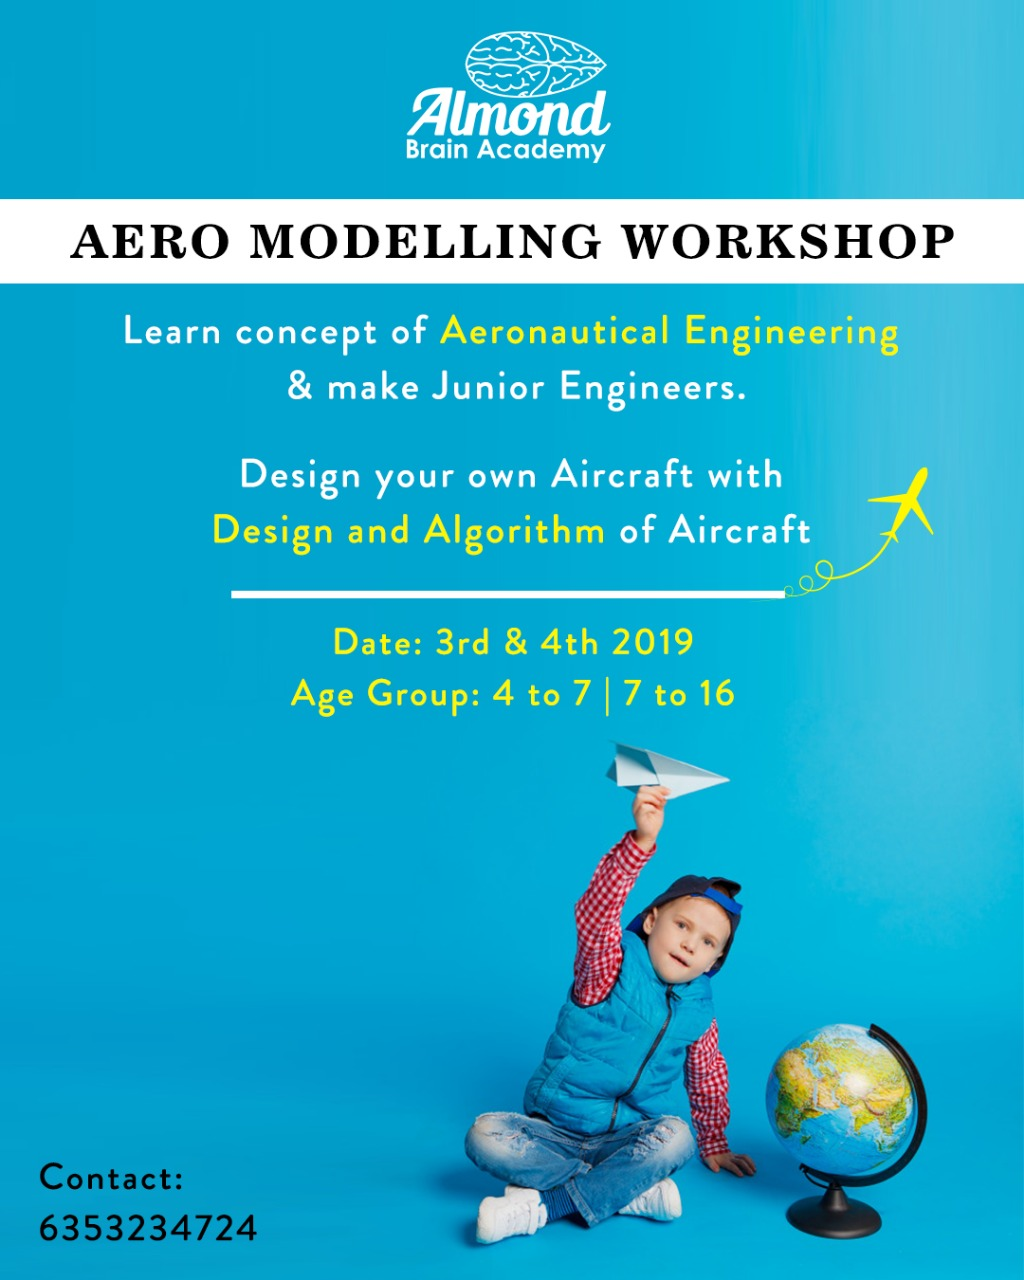 Learn Concept of Aeronautical Engineering (Fly High and take the Skies!!) | Almond Brain Academy | #aeromodelling#teamworking#braindevelopment#aircraft#kidsactivities - GL45486